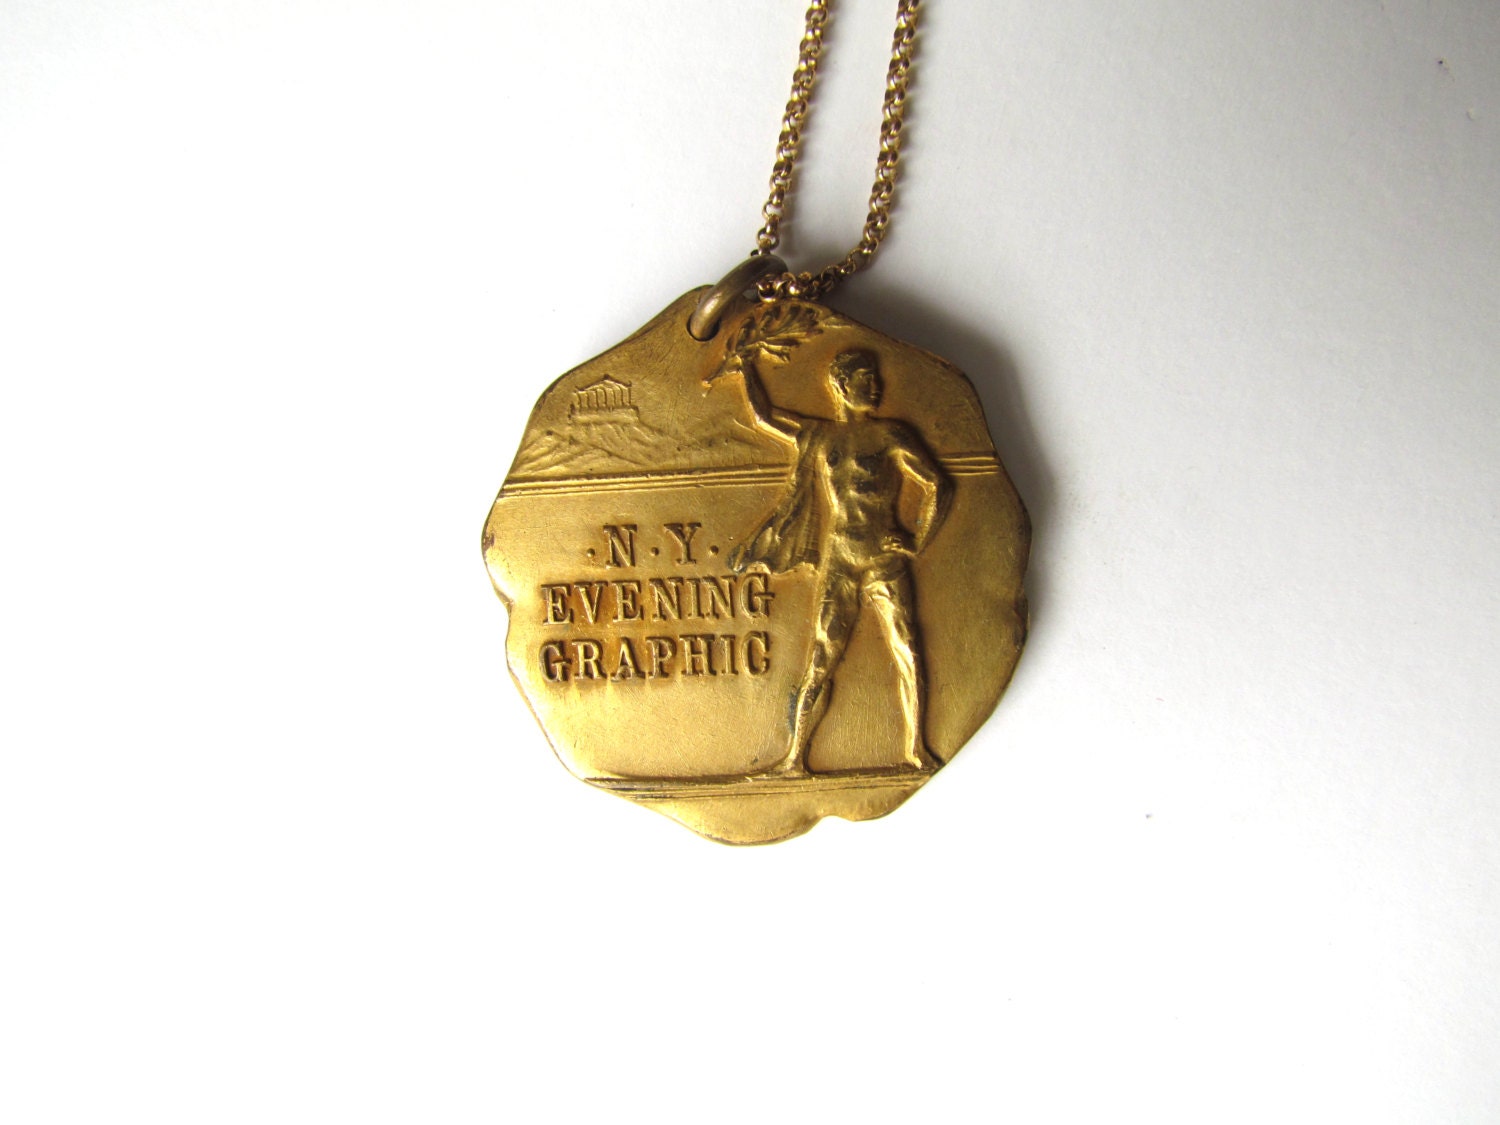 Antique Running Medal / NY Evening Graphic 1st Annul Punch Ball Championship 1926